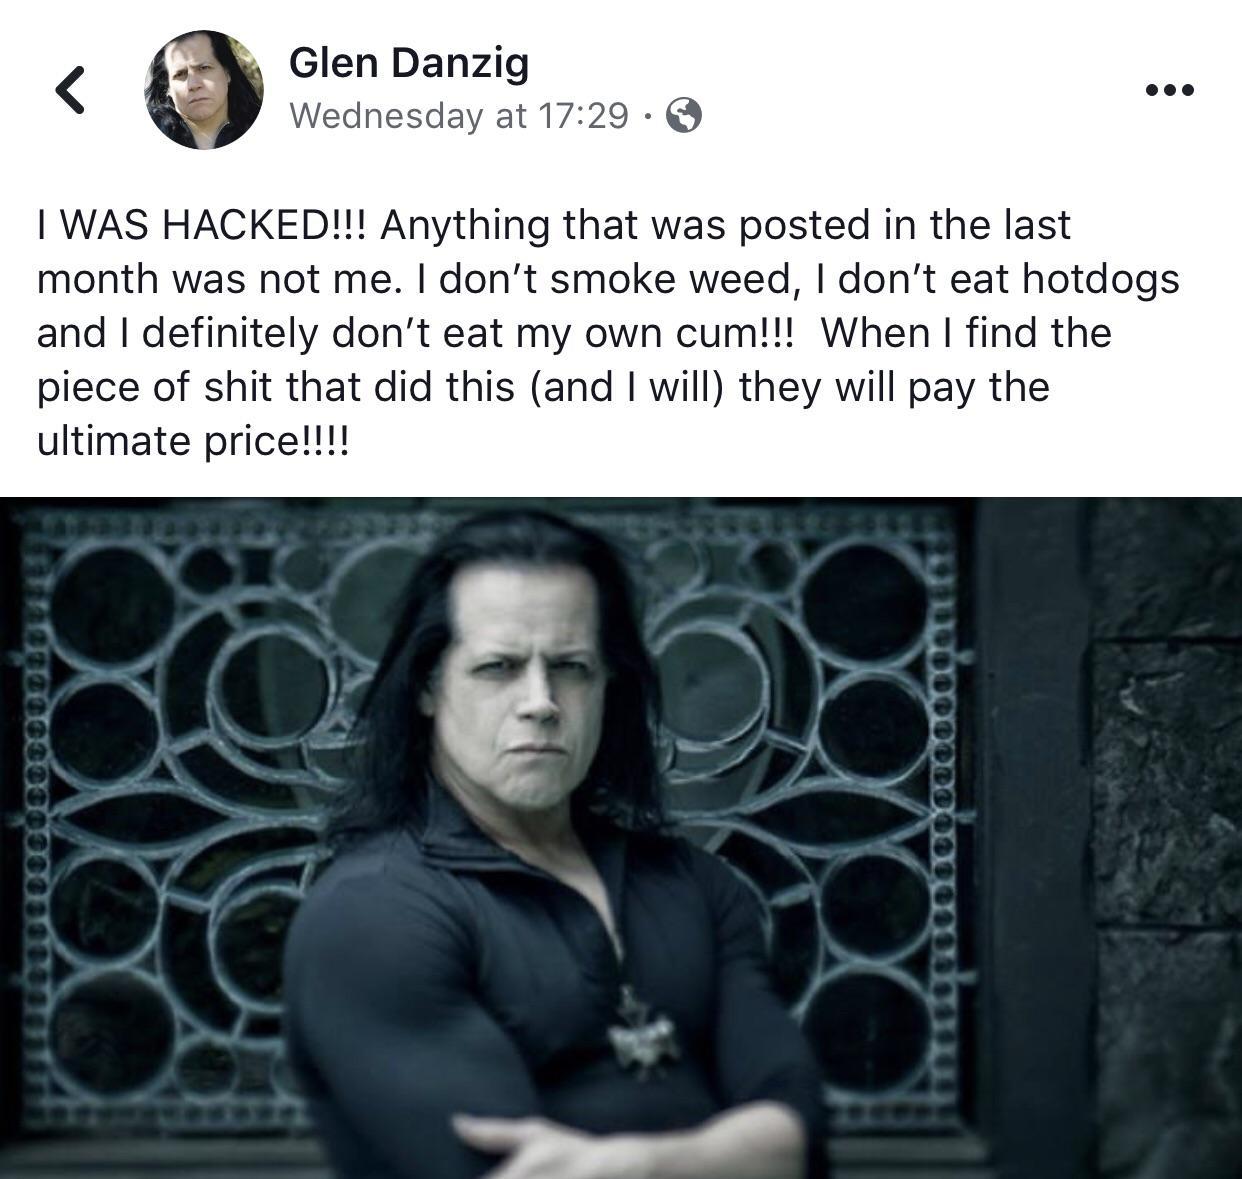 glenn danzig - Glen Danzig Wednesday at I Was Hacked!!! Anything that was posted in the last month was not me. I don't smoke weed, I don't eat hotdogs and I definitely don't eat my own cum!!! When I find the piece of shit that did this and I will they wil